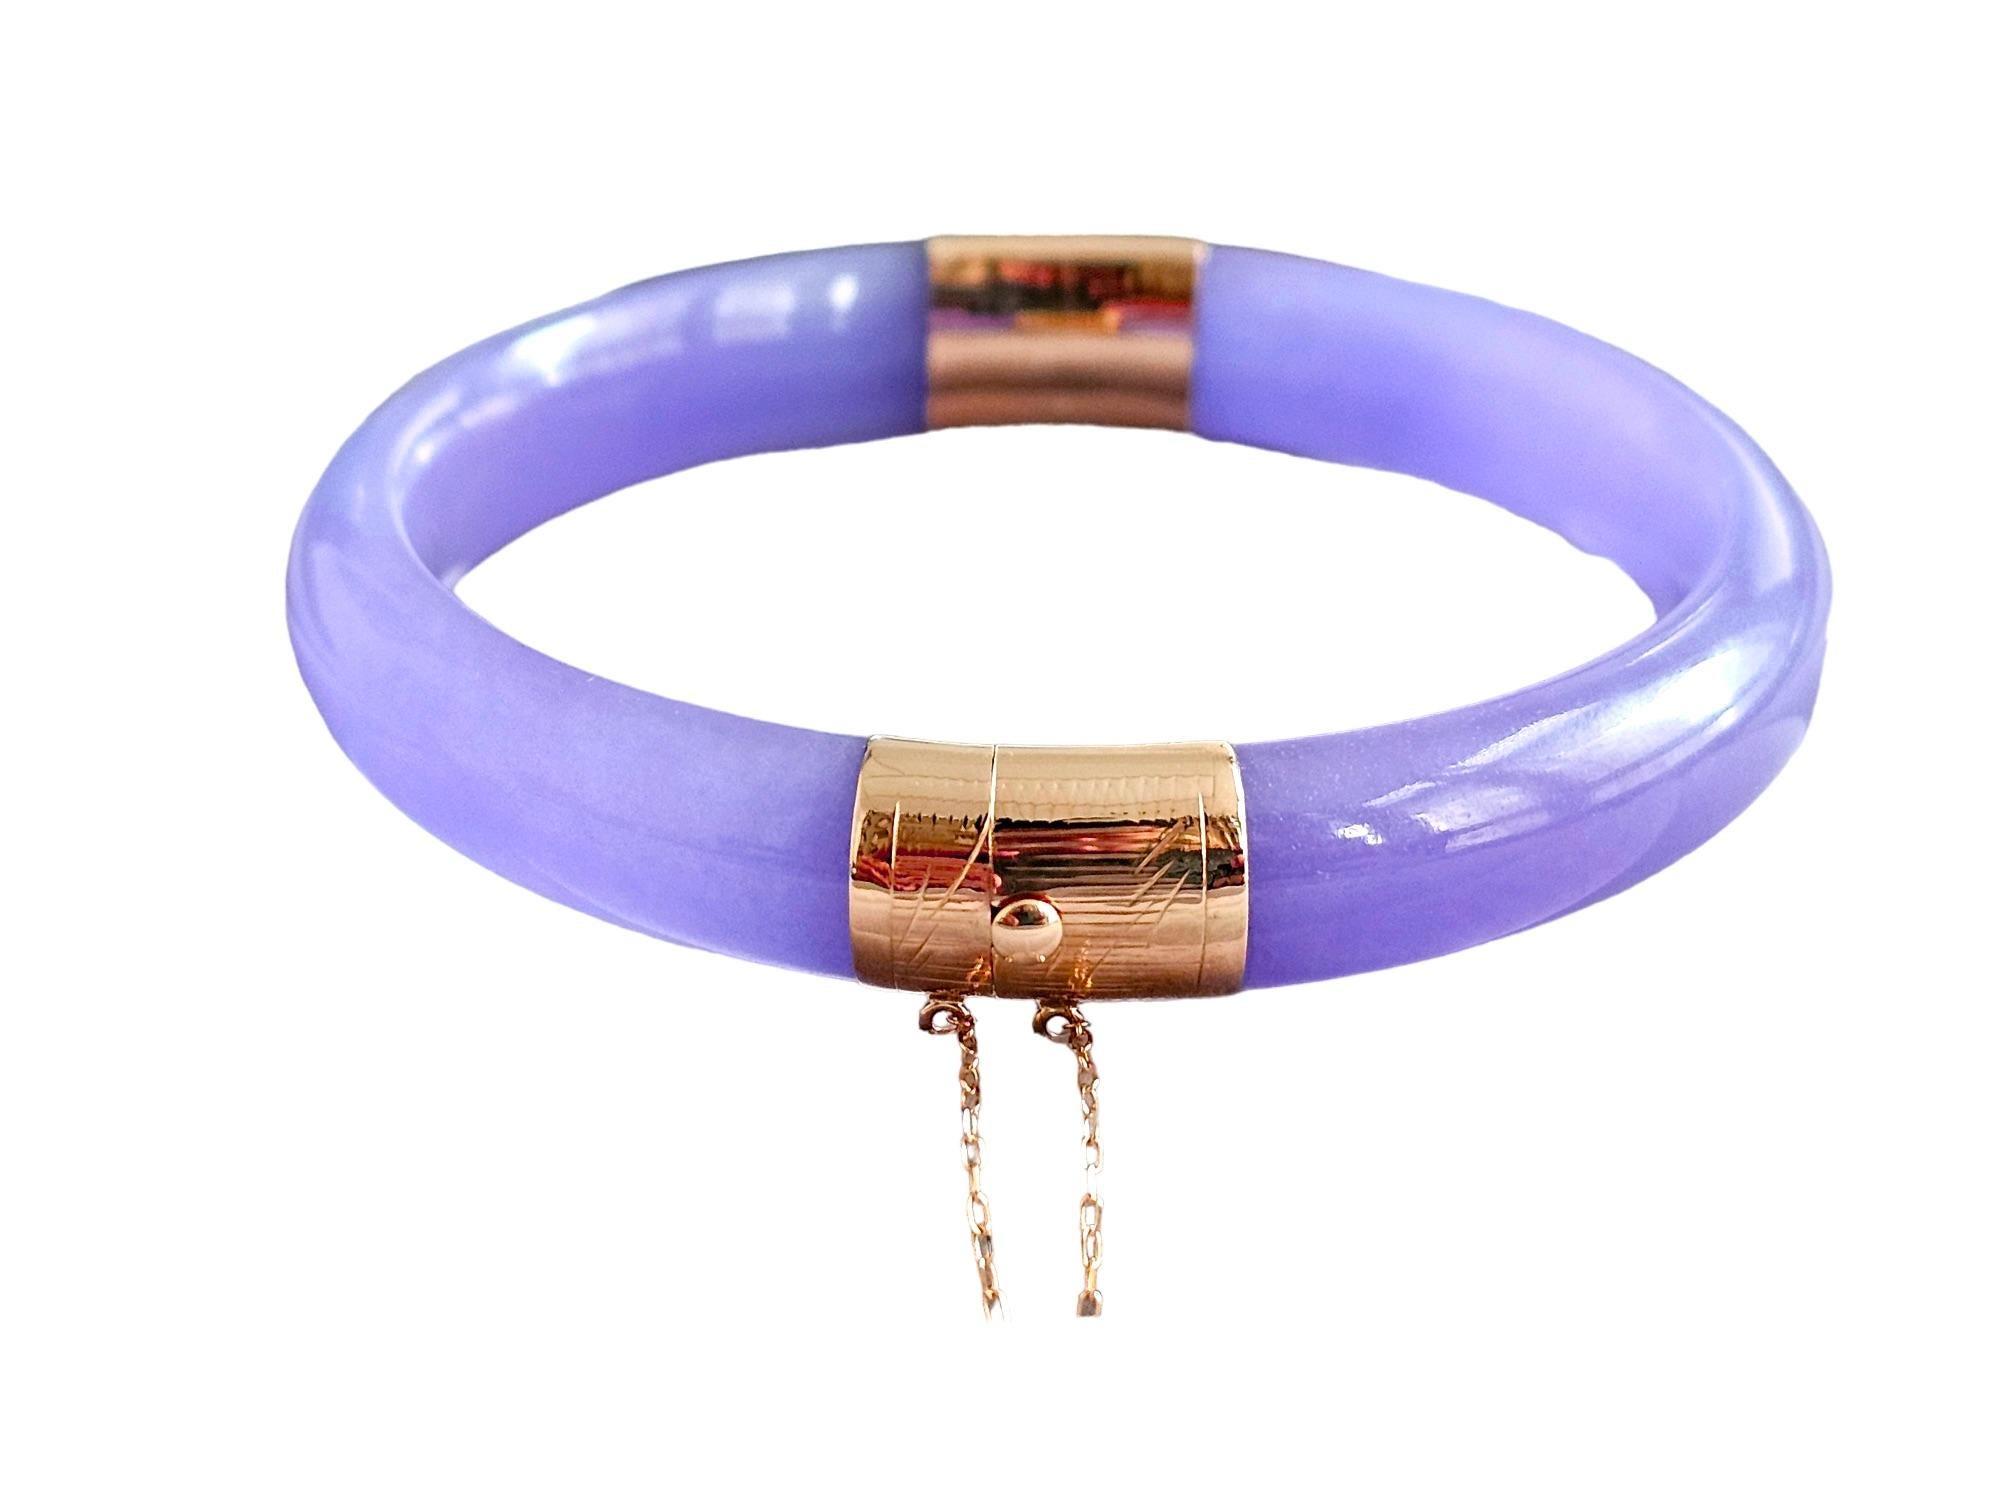 Using the best Handpicked Lavender Jadeite (B/C) from Burma, we created an authoritative and classy statement bangle bracelet. The 'Viceroy's Circular Lavender Jade Bangle Bracelet' accentuates the Gold and Lavender Jade Elements by displaying